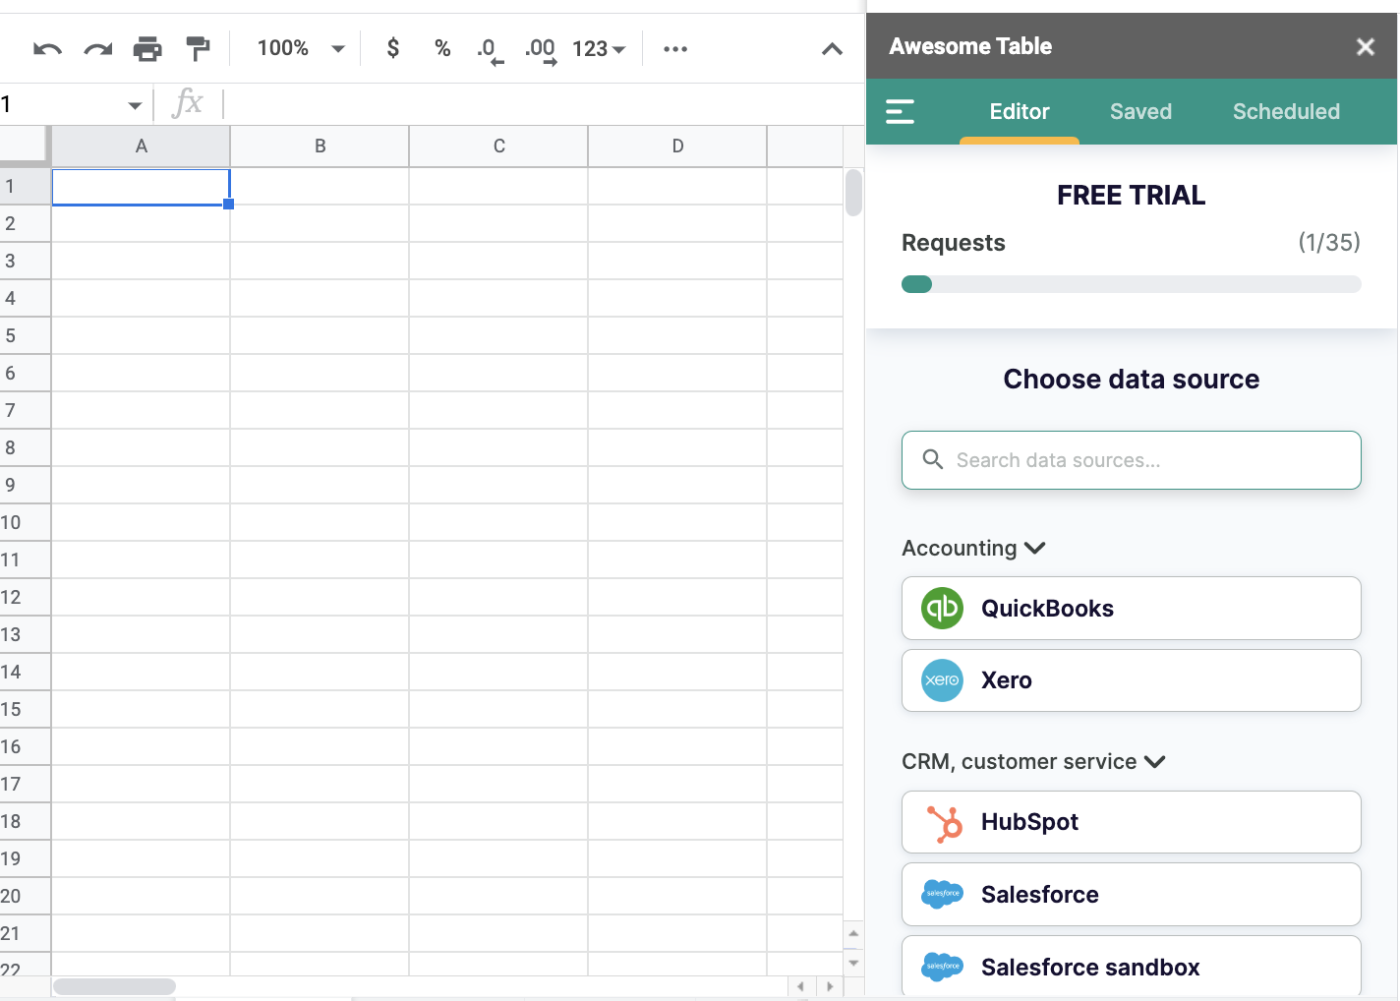 Awesome Table Google Sheets add-on. 